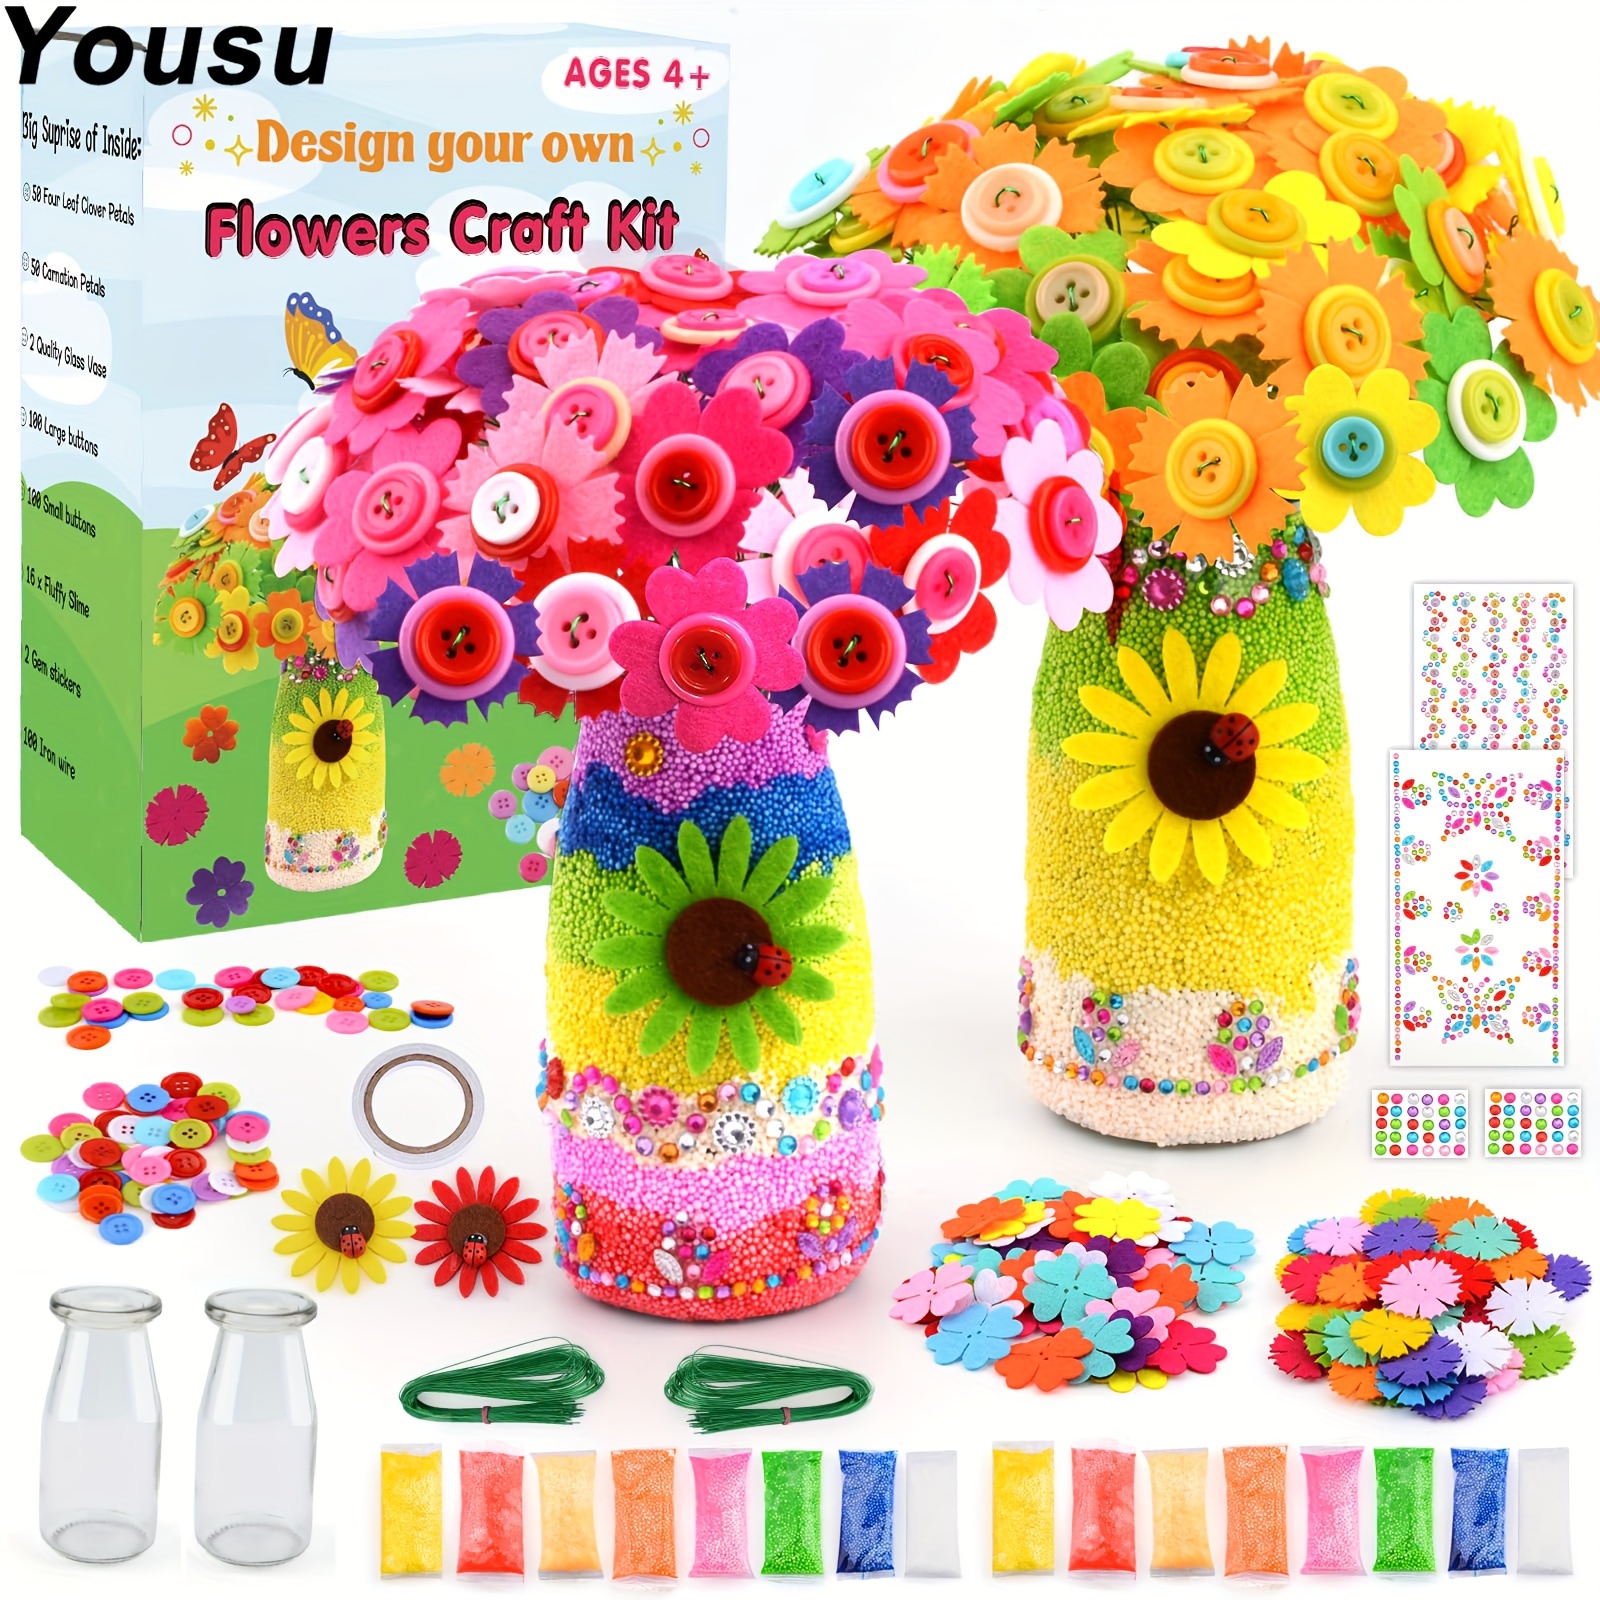 

Yousu Arts And Crafts For Girls Ages 6-12 Make Your Own Flower Bouquet With Buttons And Felt Flowers, Diy Activity Supplies Vase Art And Craft Kits Birthday Gifts For Girls 6 7 8 9 10 11 12 Year Old